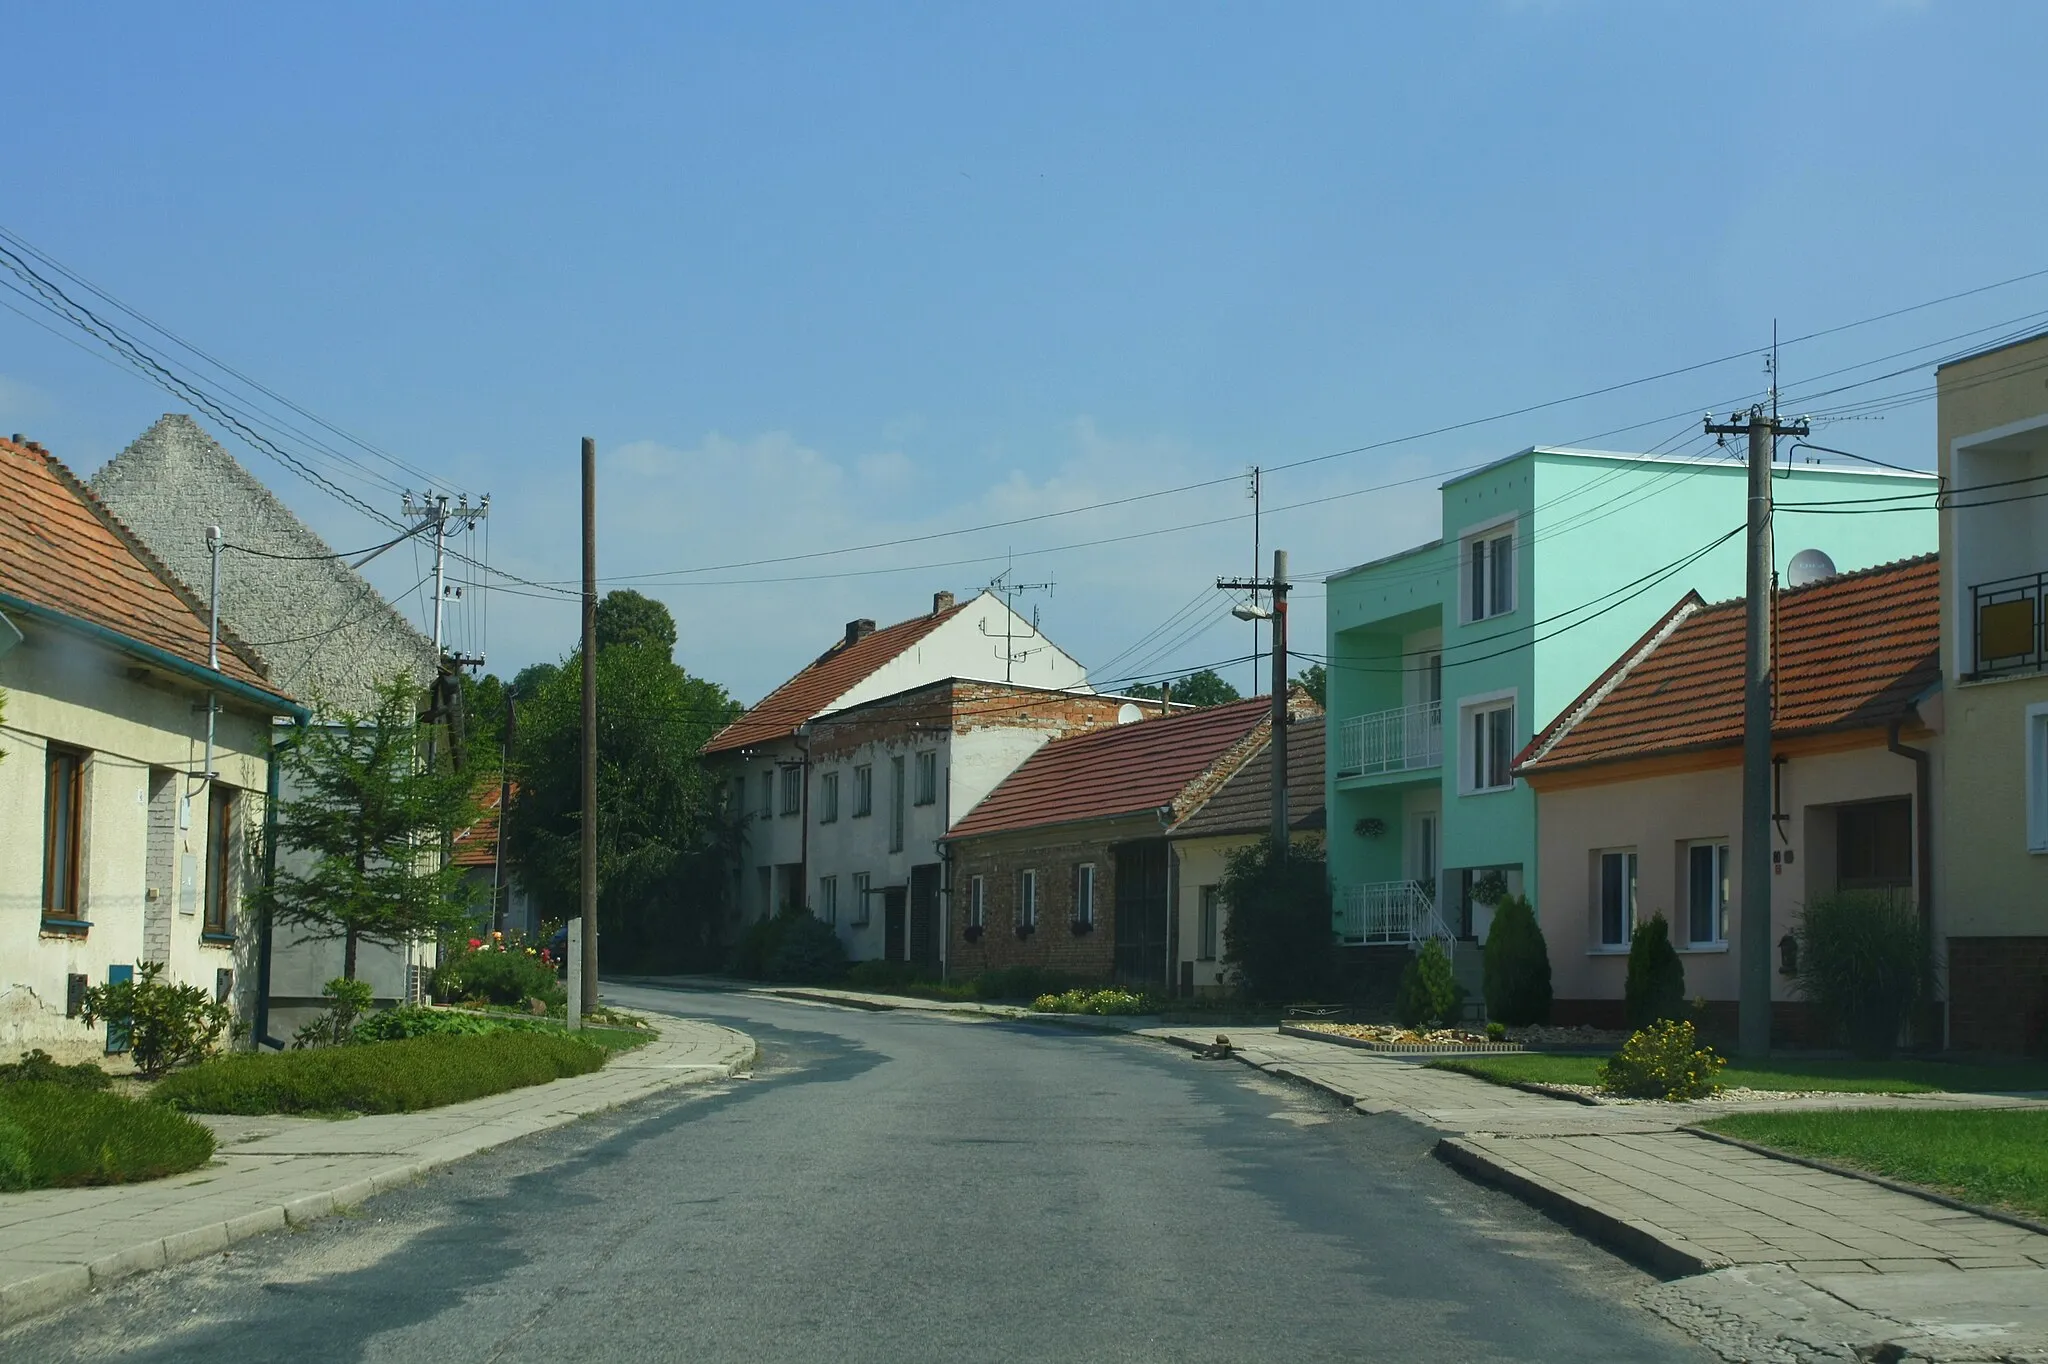 Photo showing: Žádovice, Hodonín district, Czech Republic - street connecting the upper and the lower part of the village